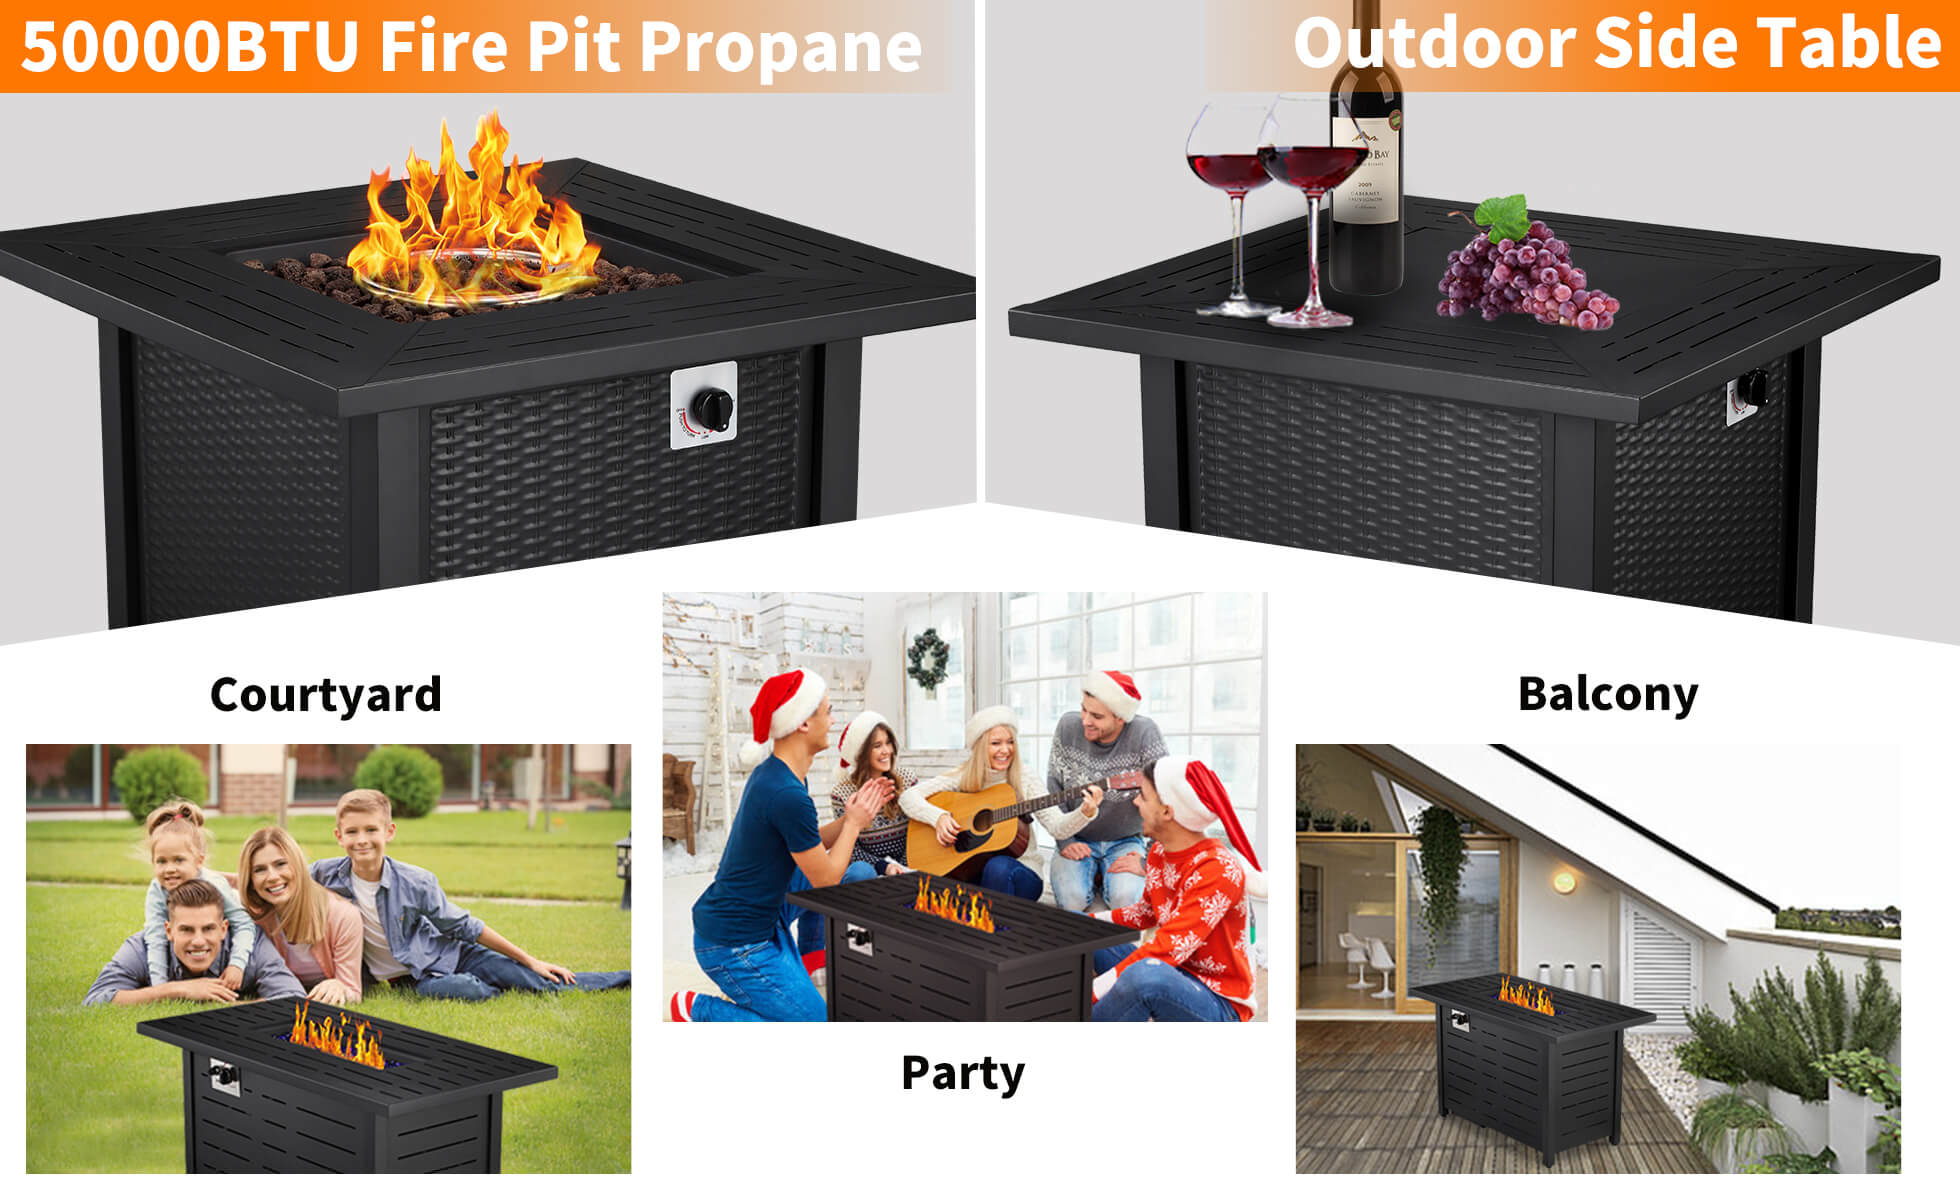 R.W.Flame 32inch Propane Fire Pit,2 in 1 Fire Pit Table 50,000 BTU with Glass Cover